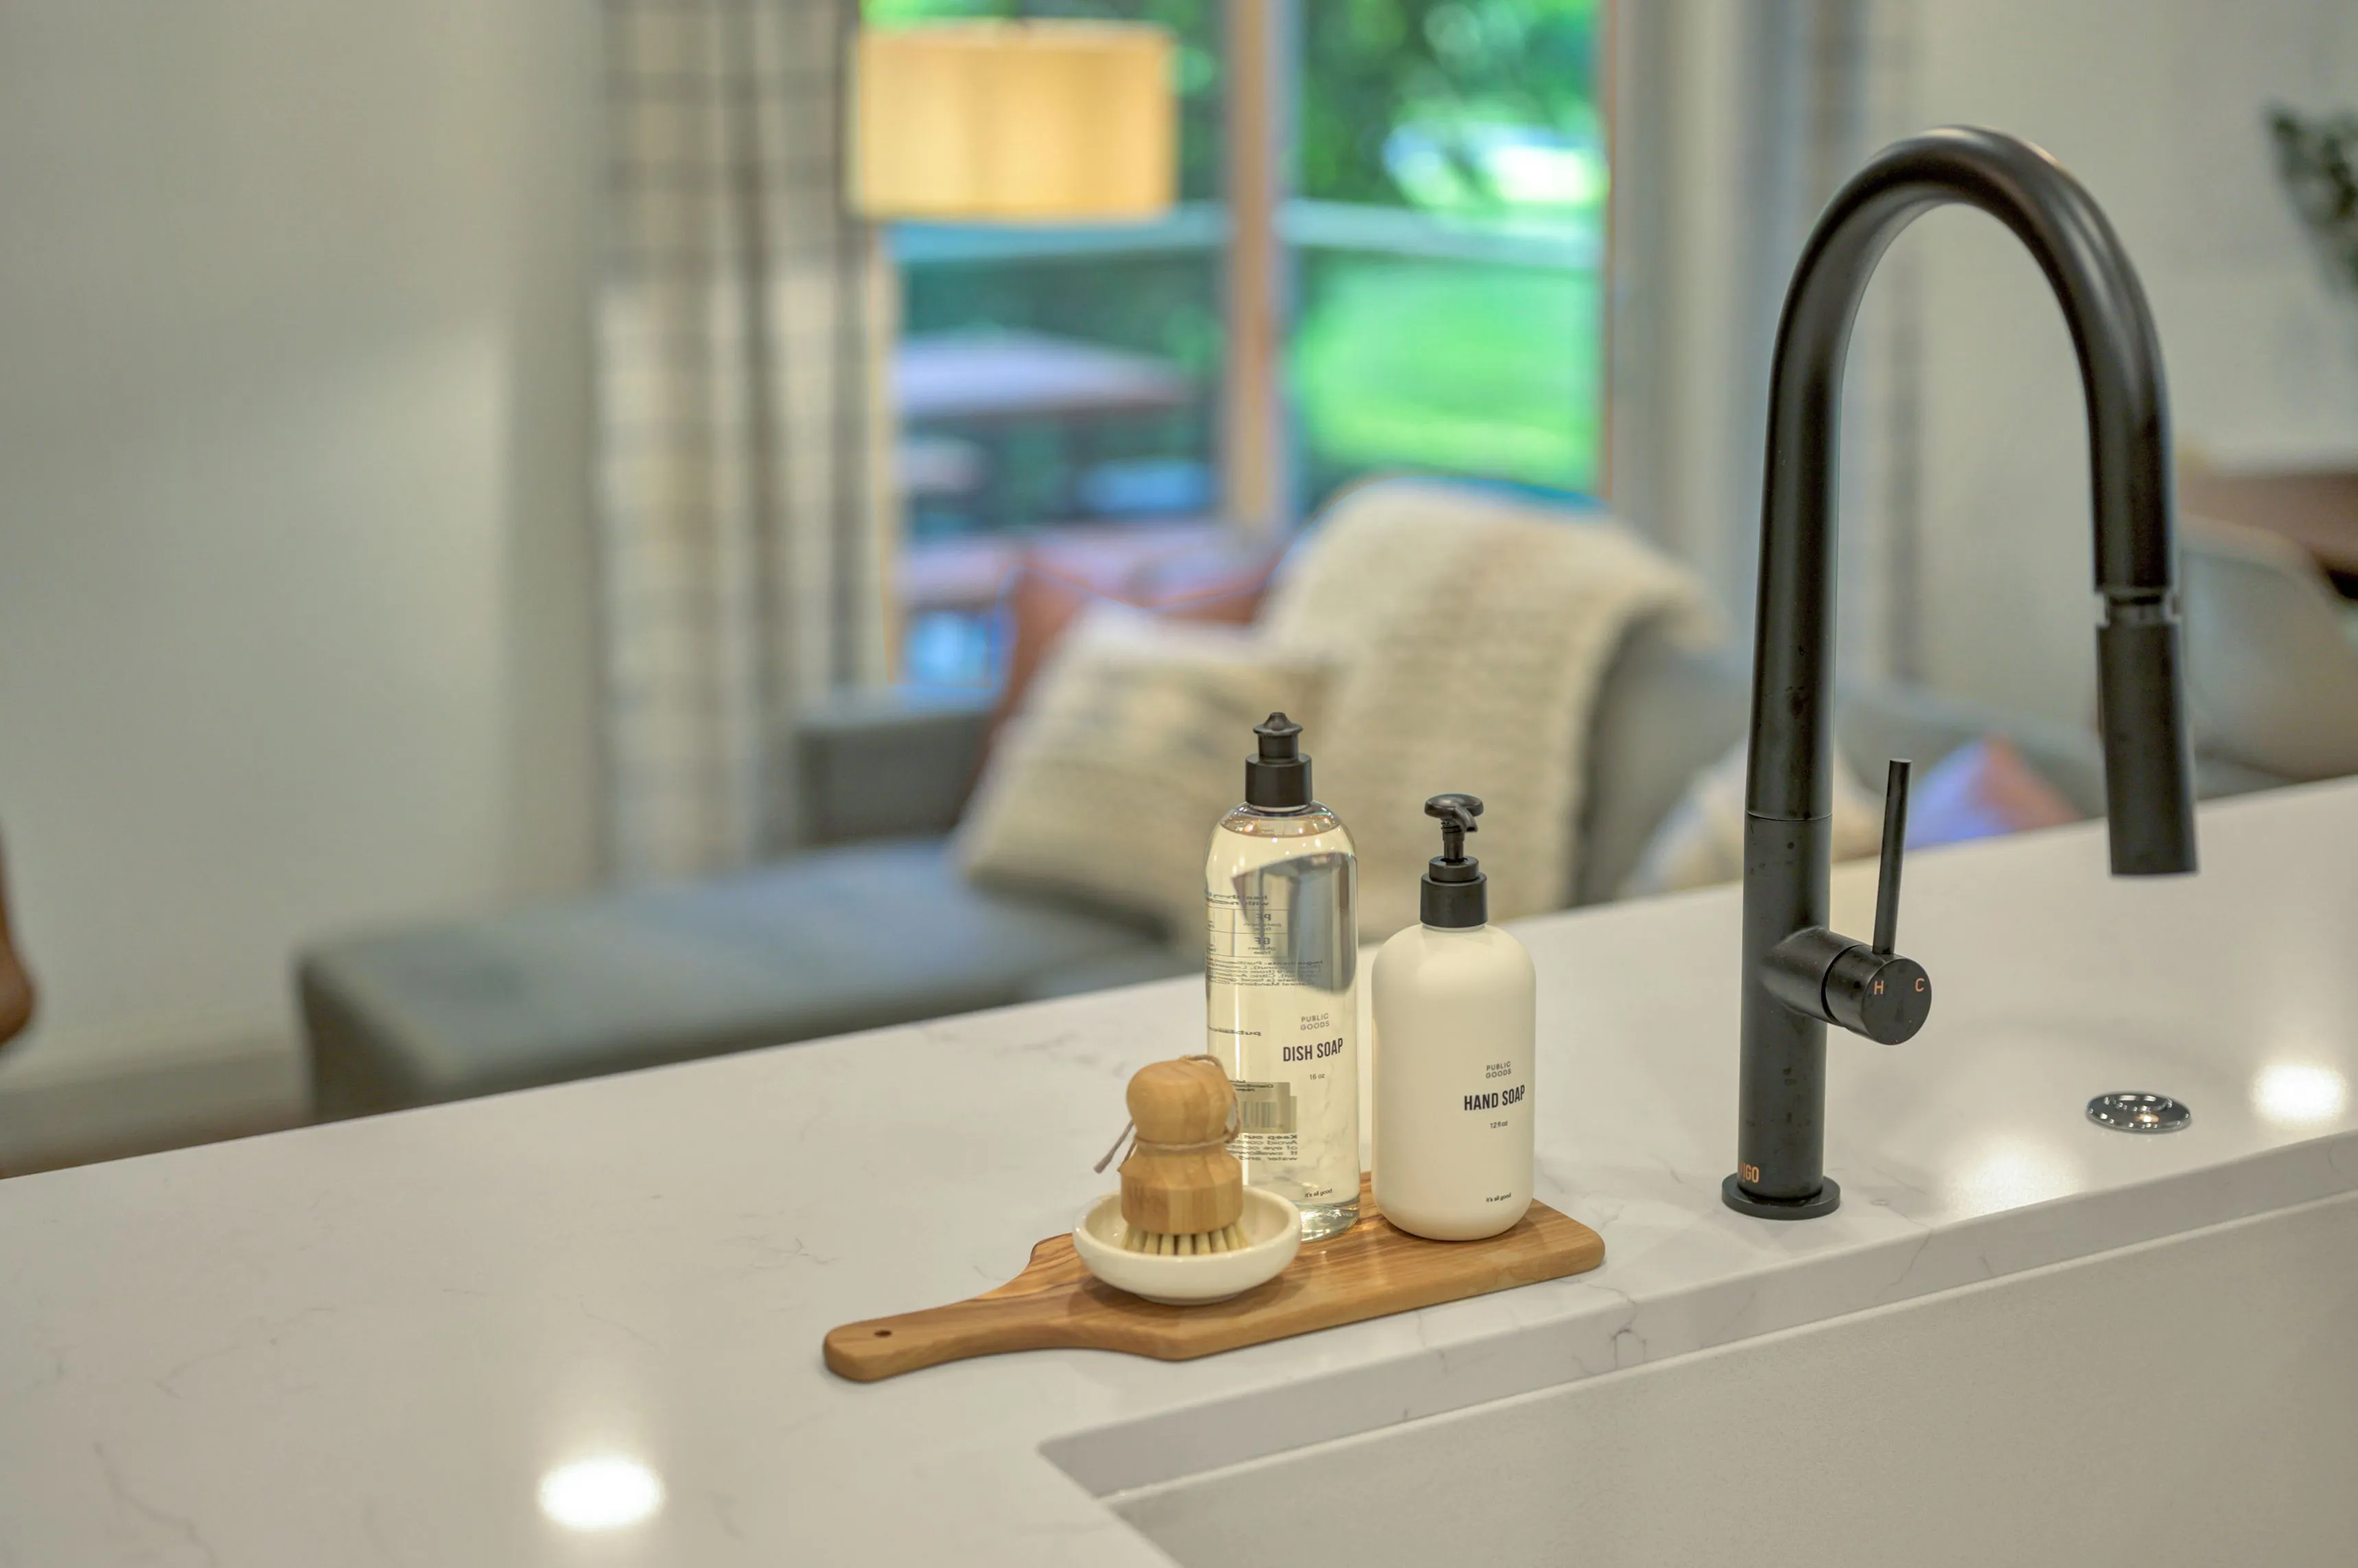 Modern kitchen sink with a black faucet, soap dispensers, and a wooden dish brush on a marble countertop, with a blurred living room background.